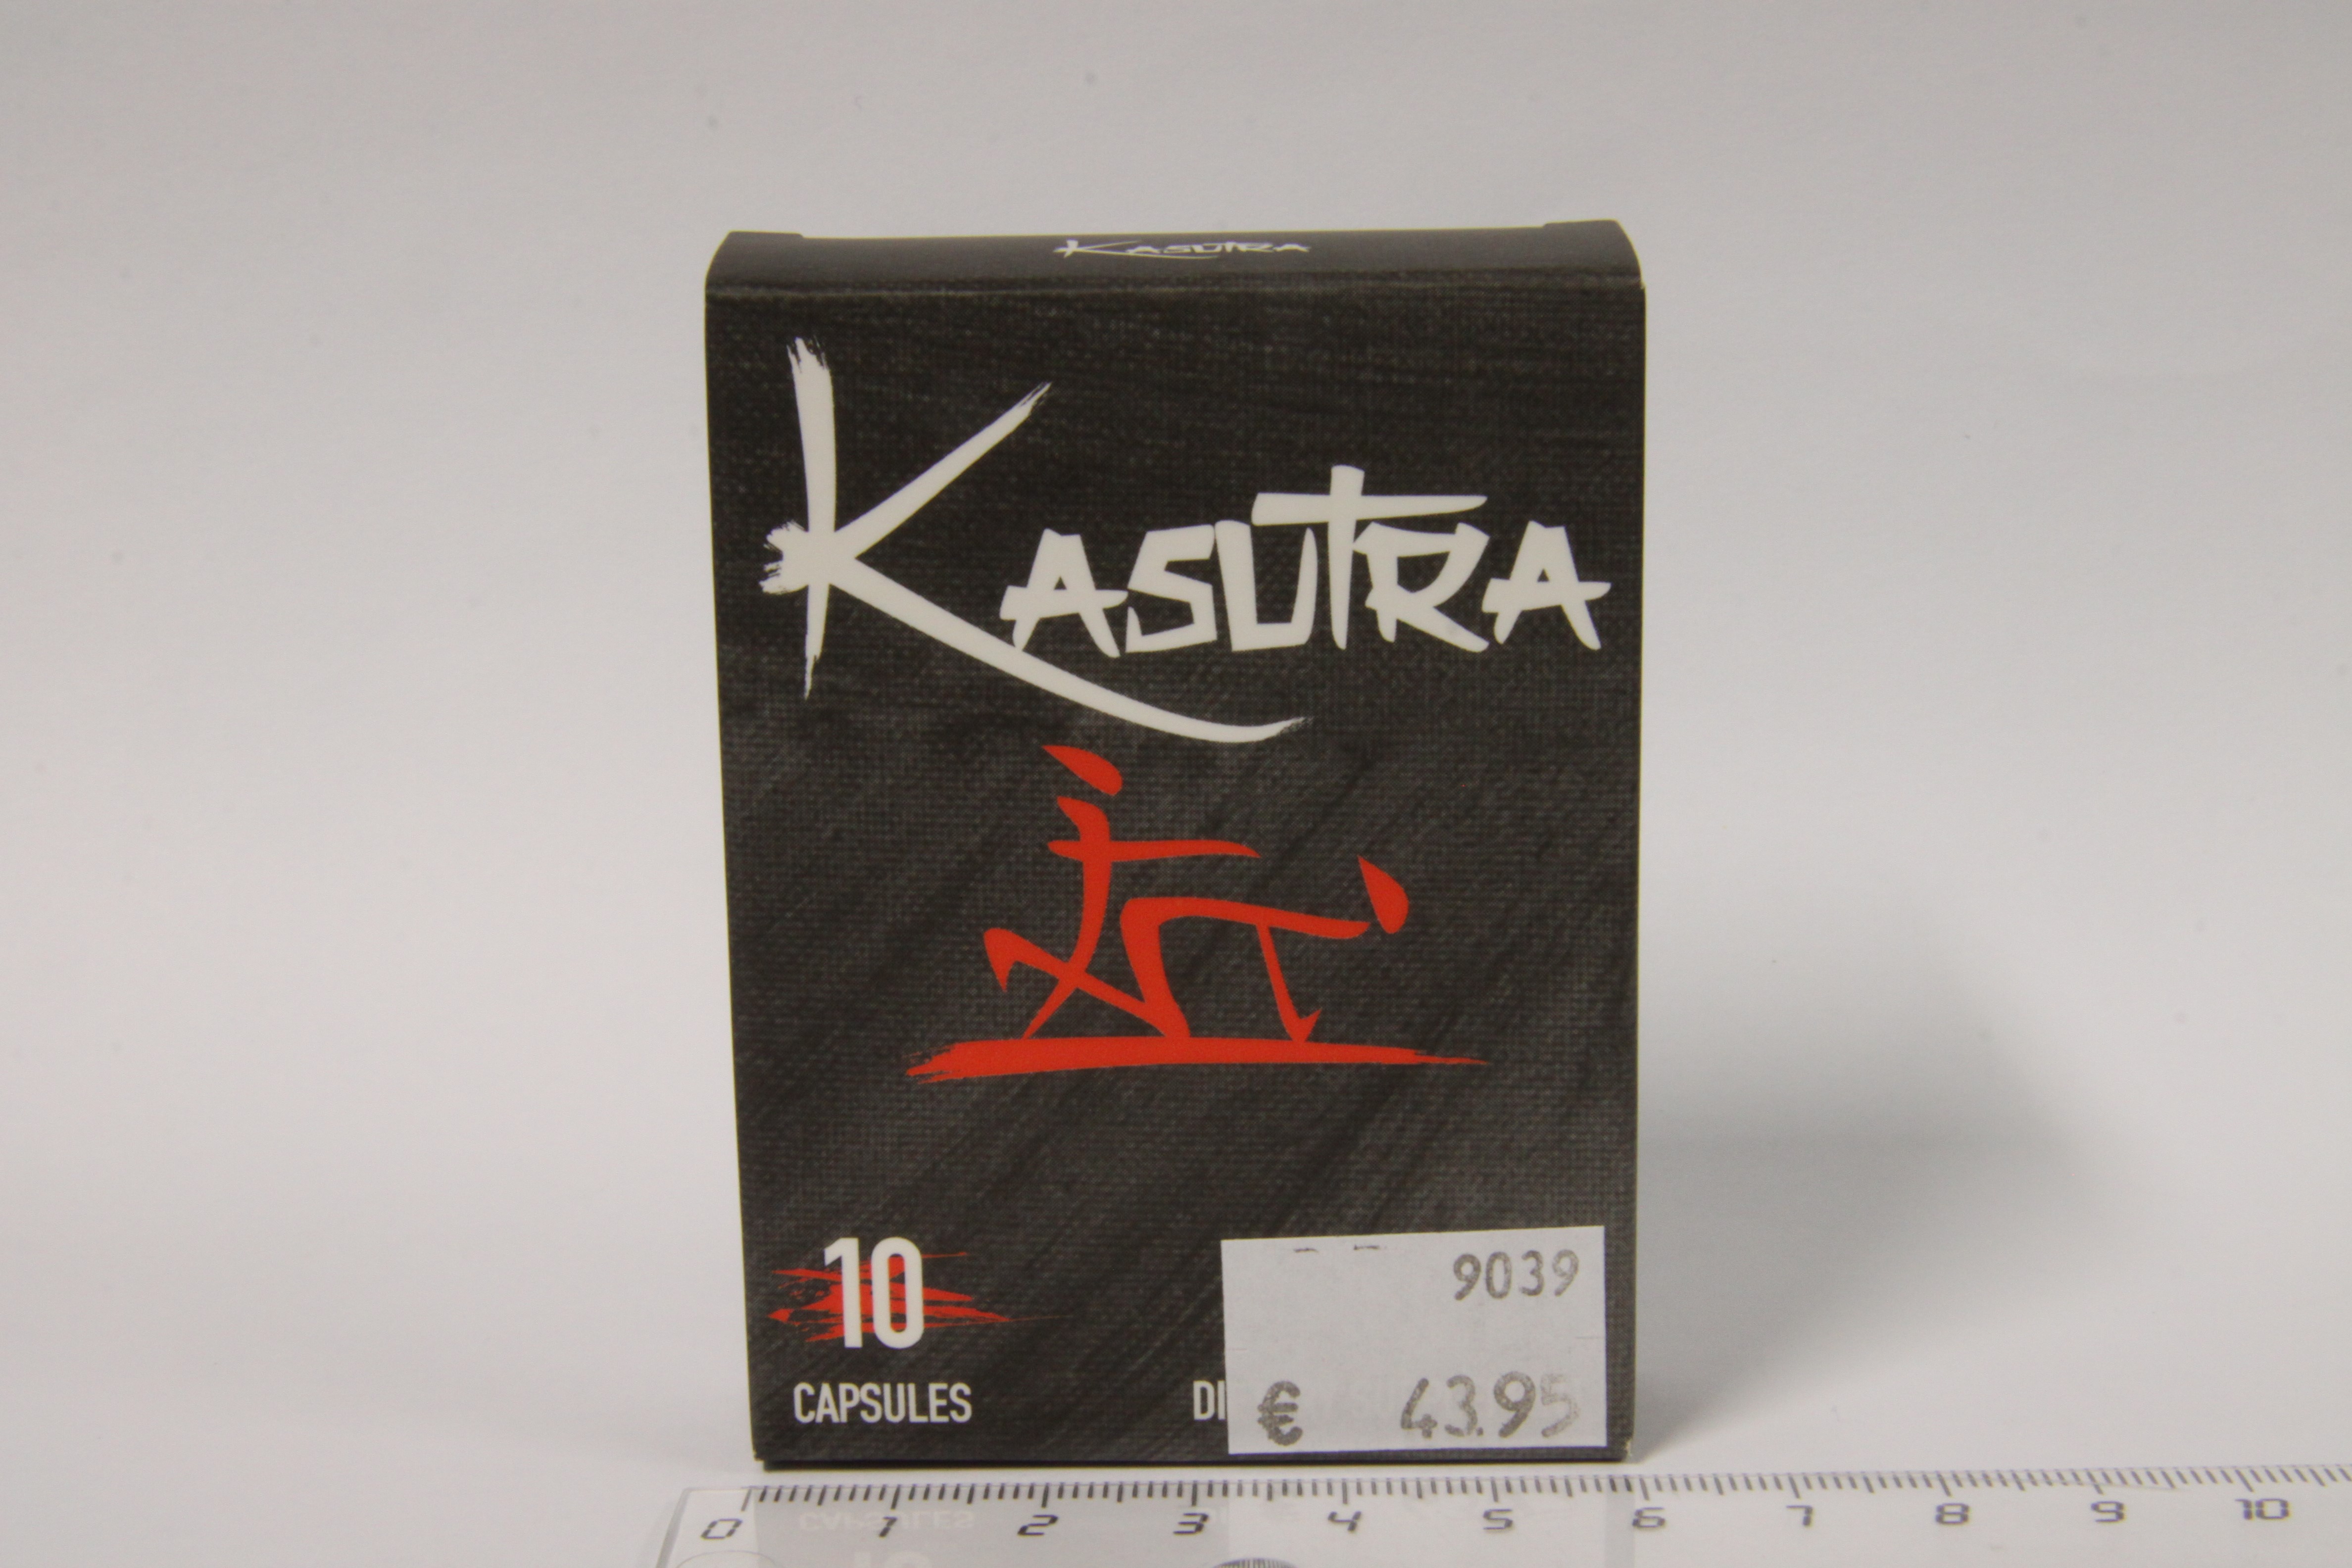 Image of the illigal product: Kasutra